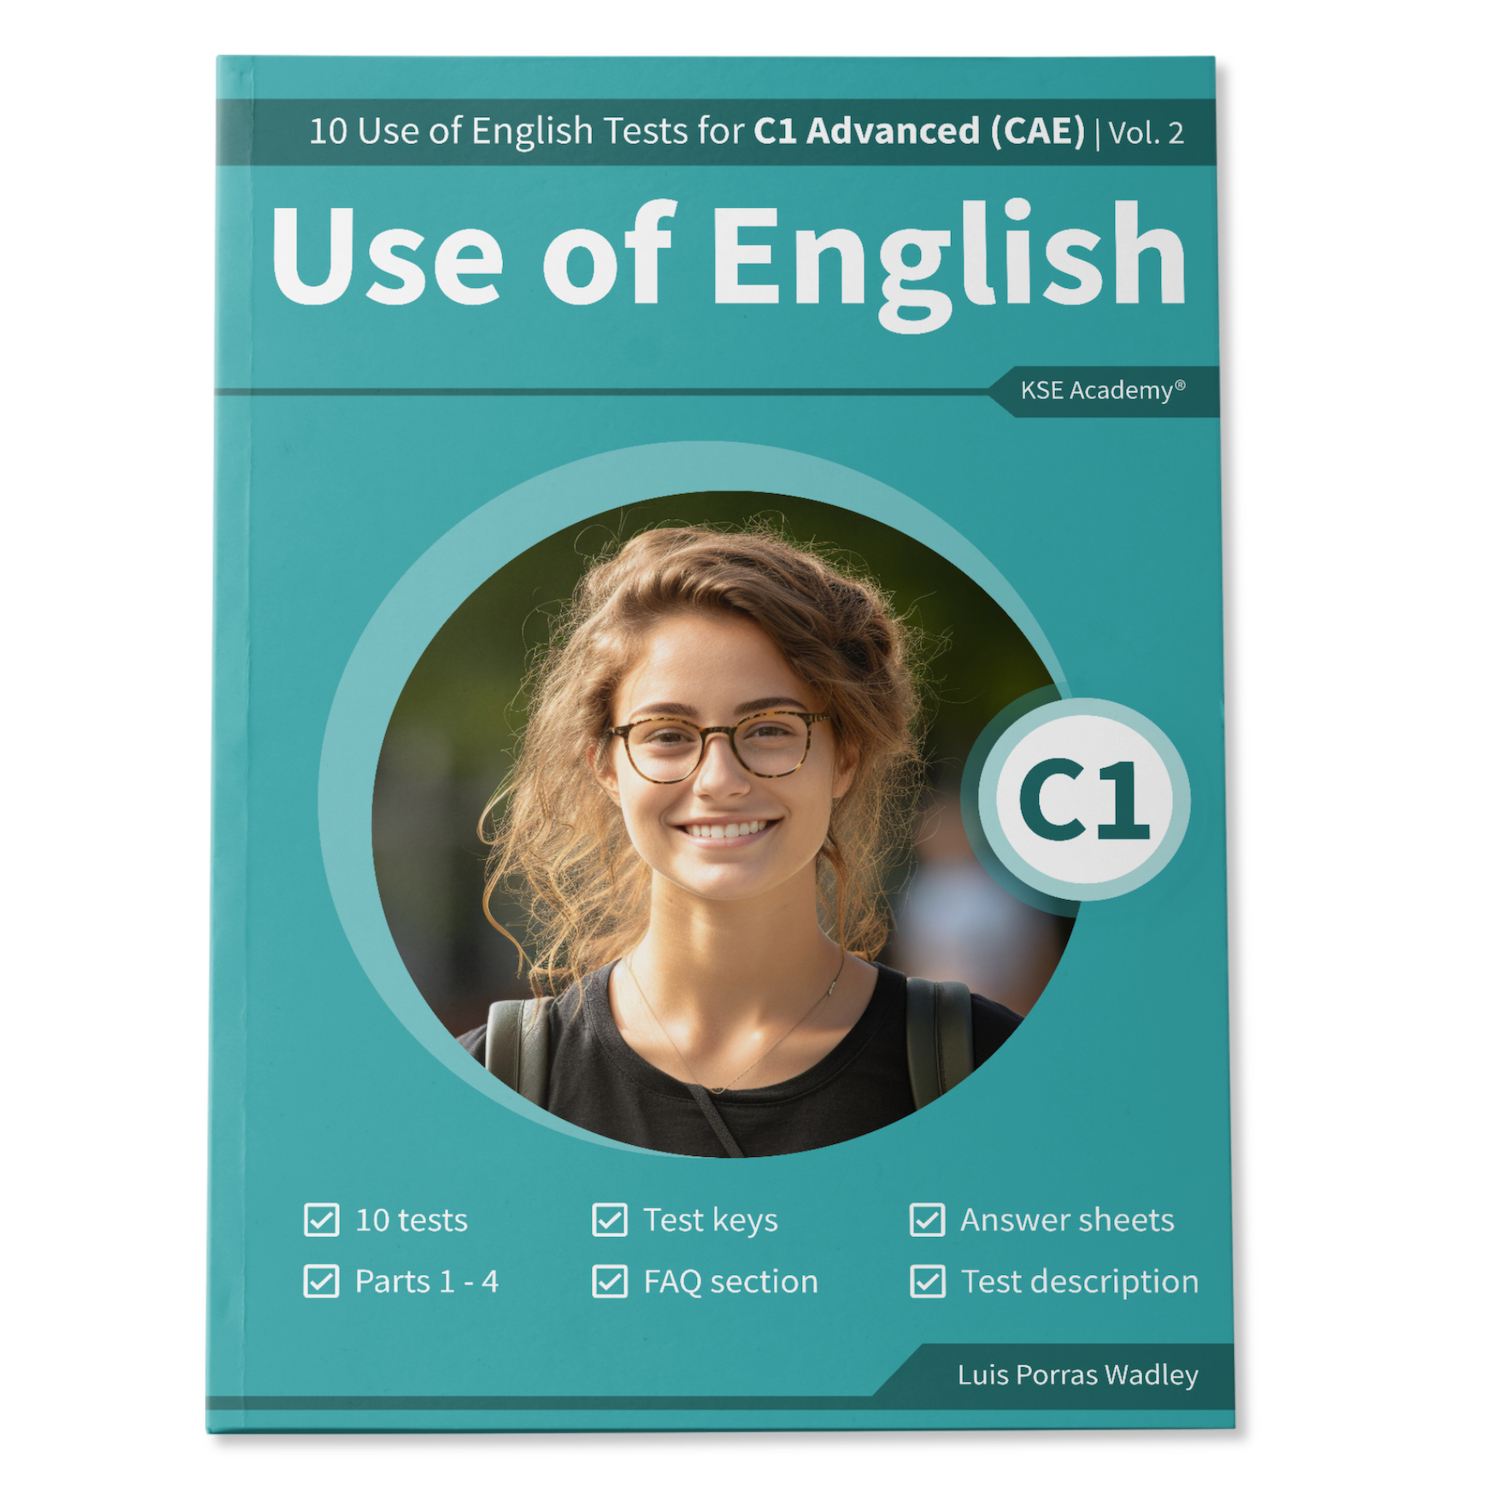 Use of English C1: 10 Practice Tests for C1 Advanced (Vol. 2)